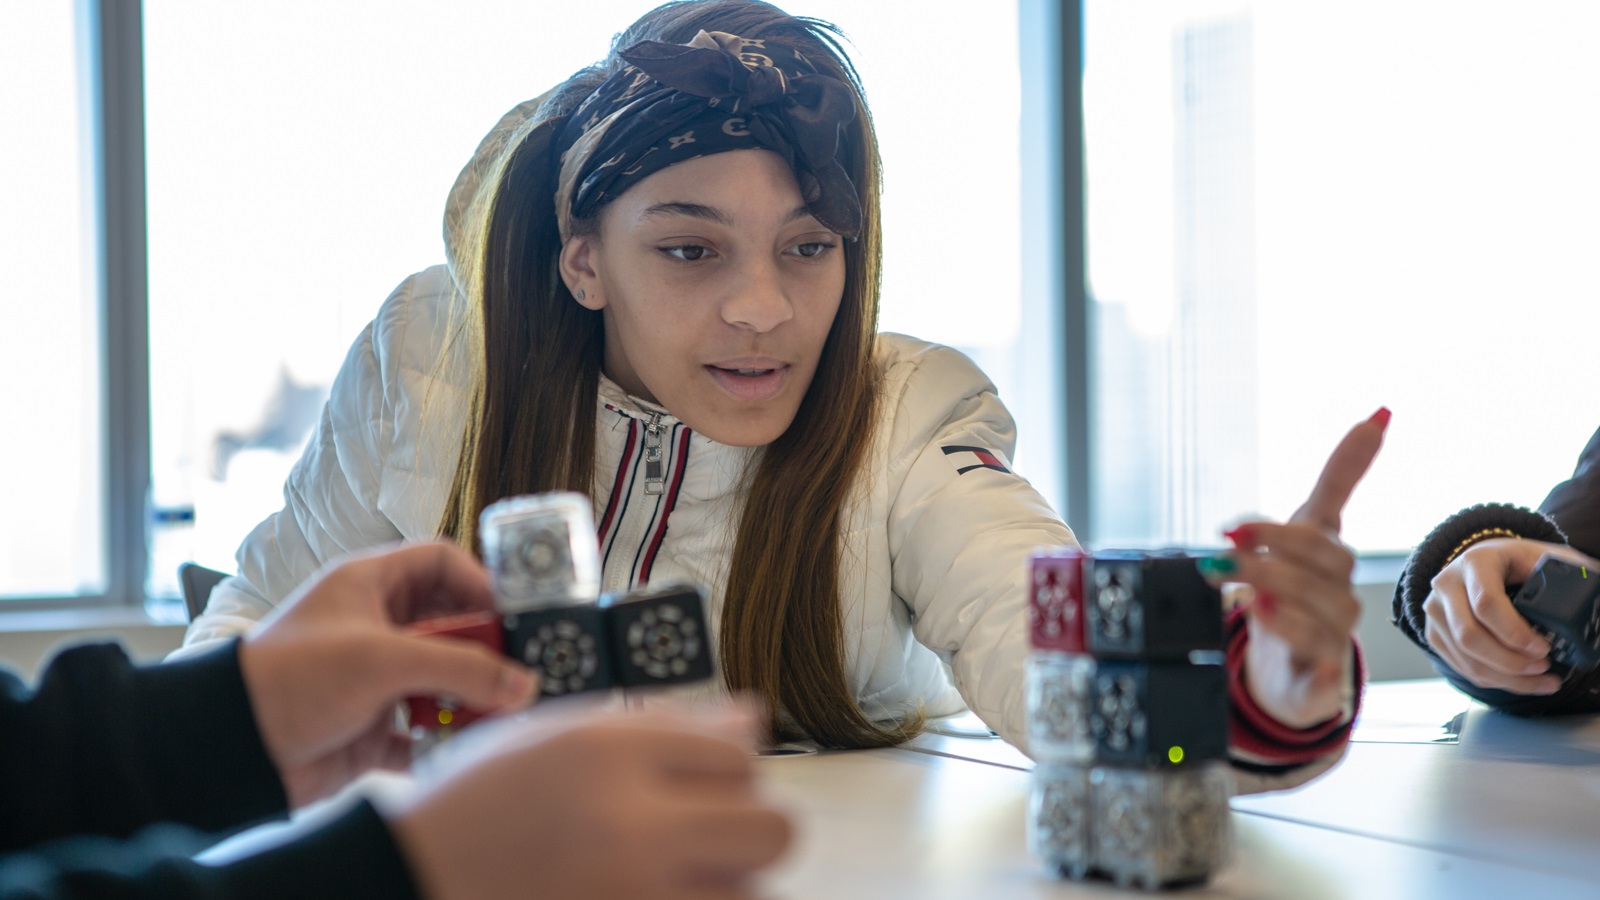 A Kenwood Academy student creaes a robot to solve a computational thinking challenge. (Image by Argonne National Laboratory.)